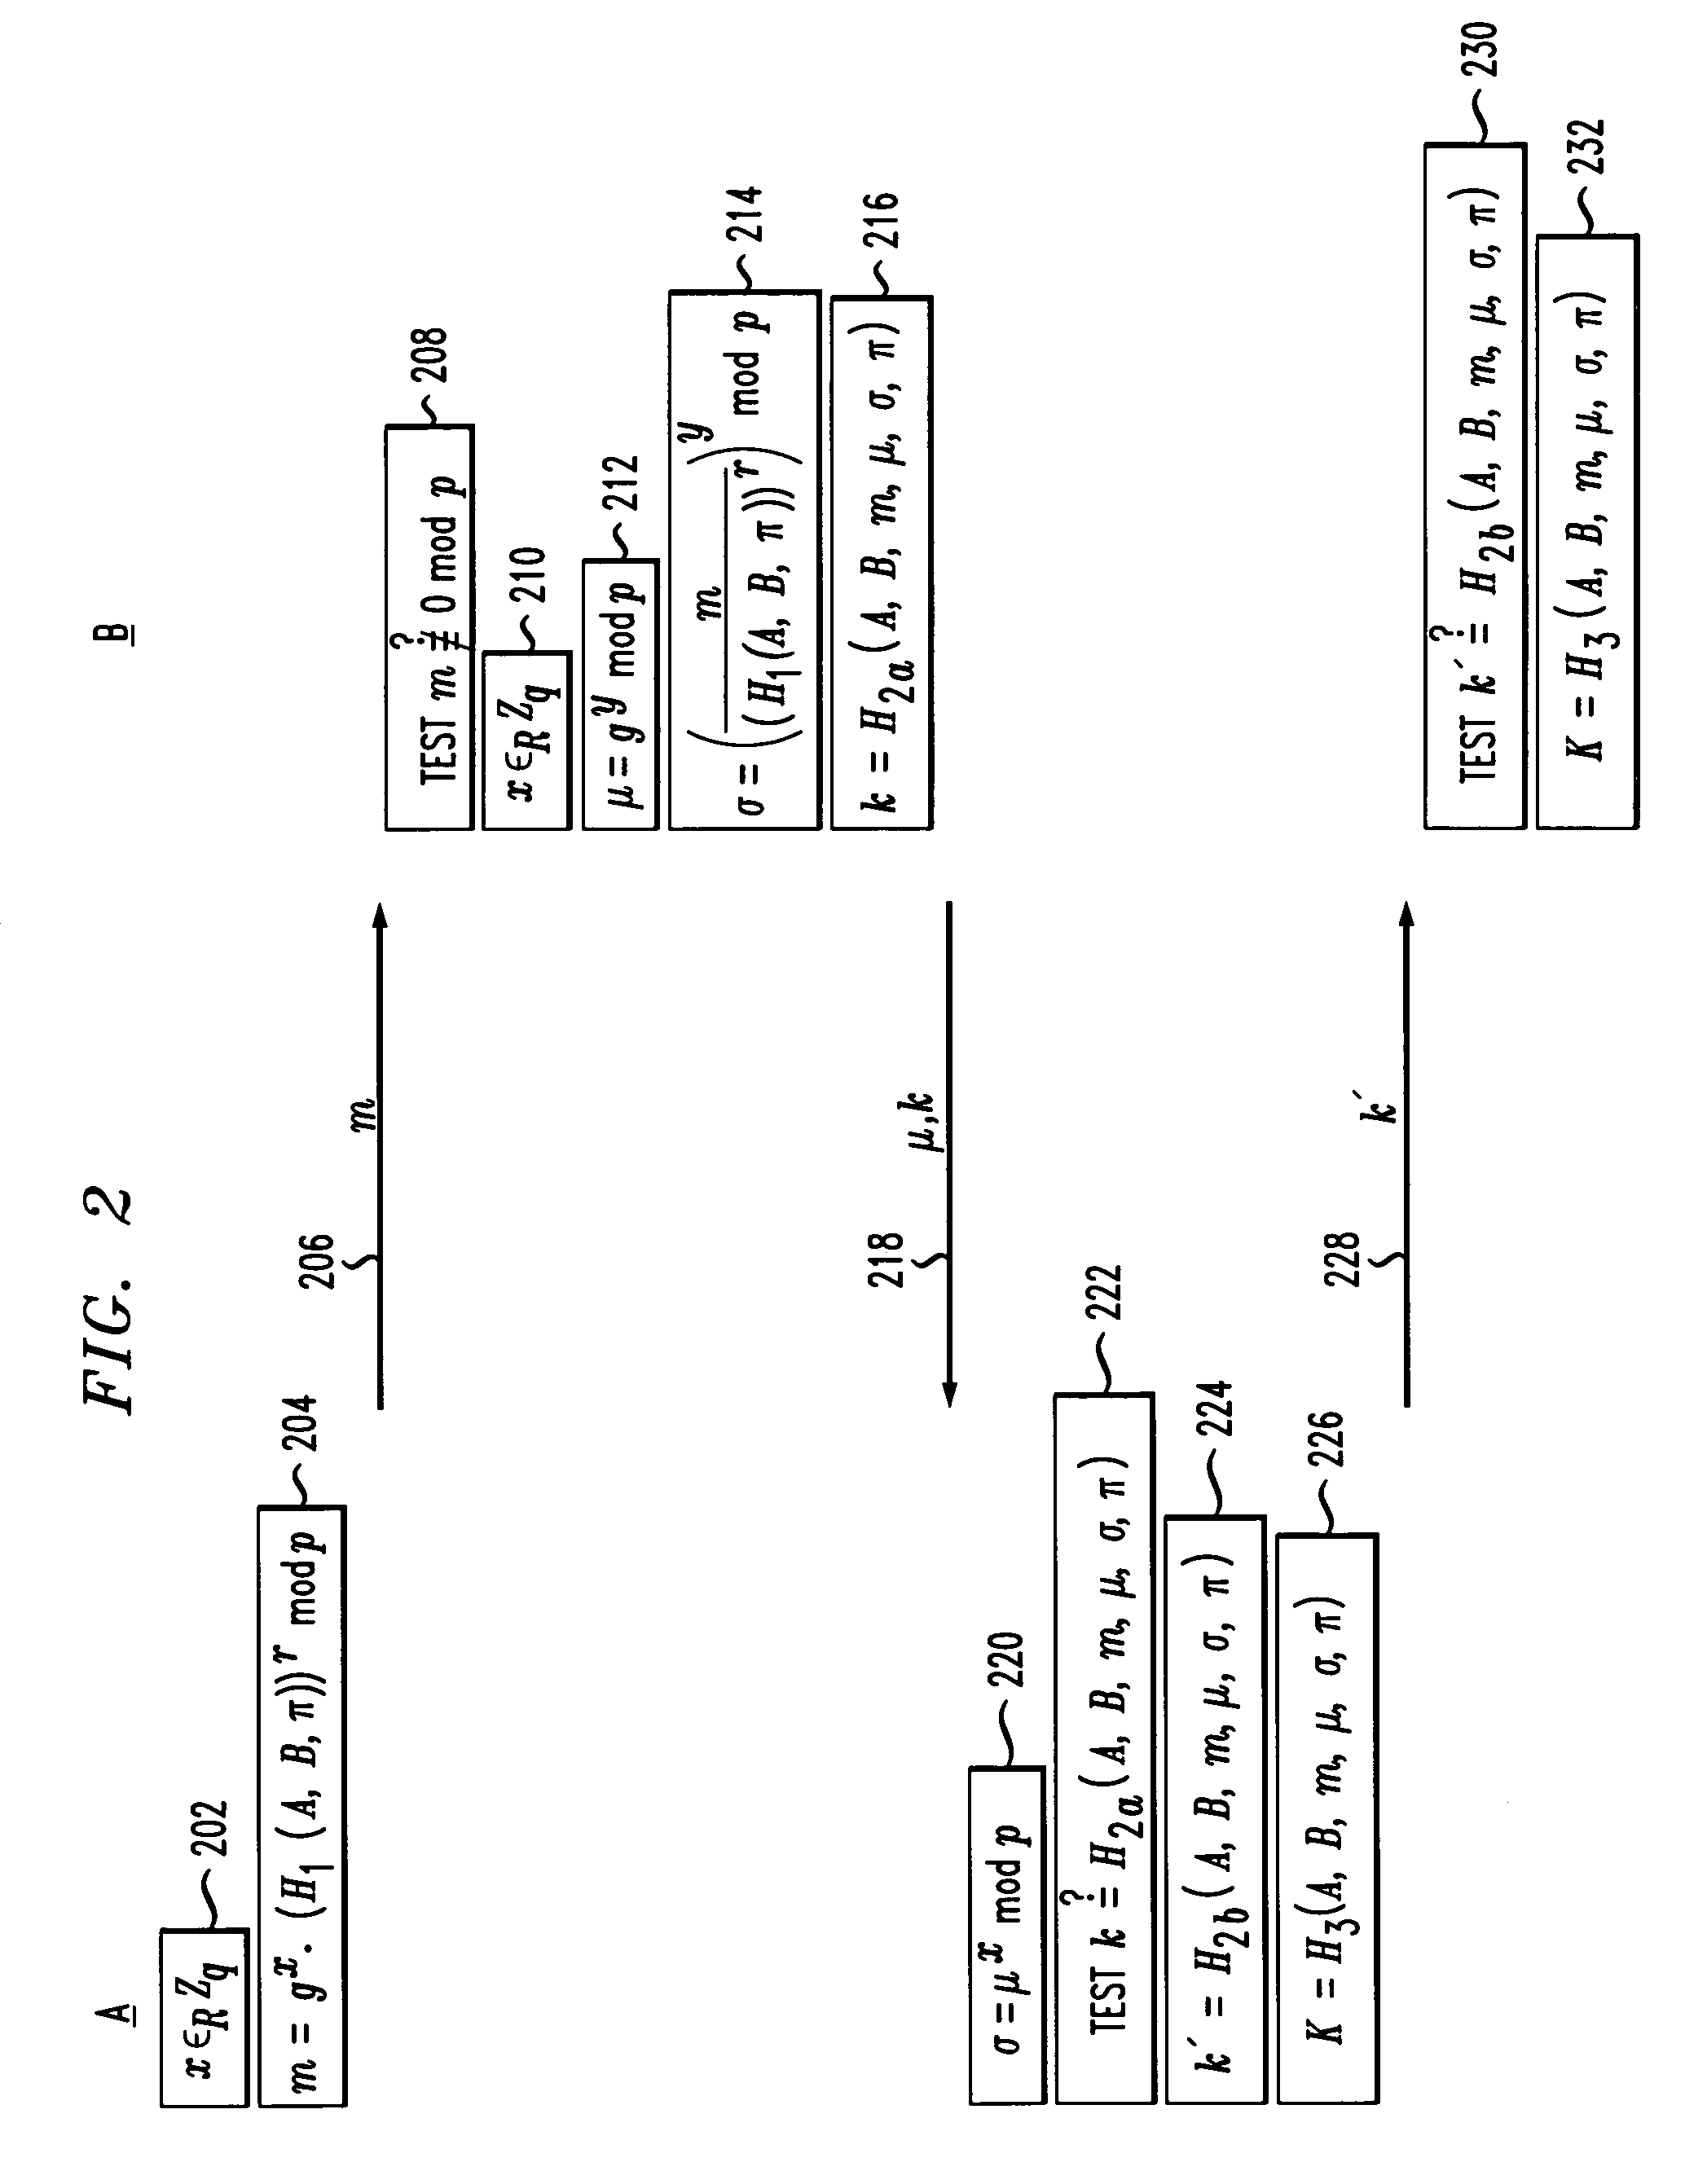 Methods and apparatus for providing efficient password-authenticated key exchange